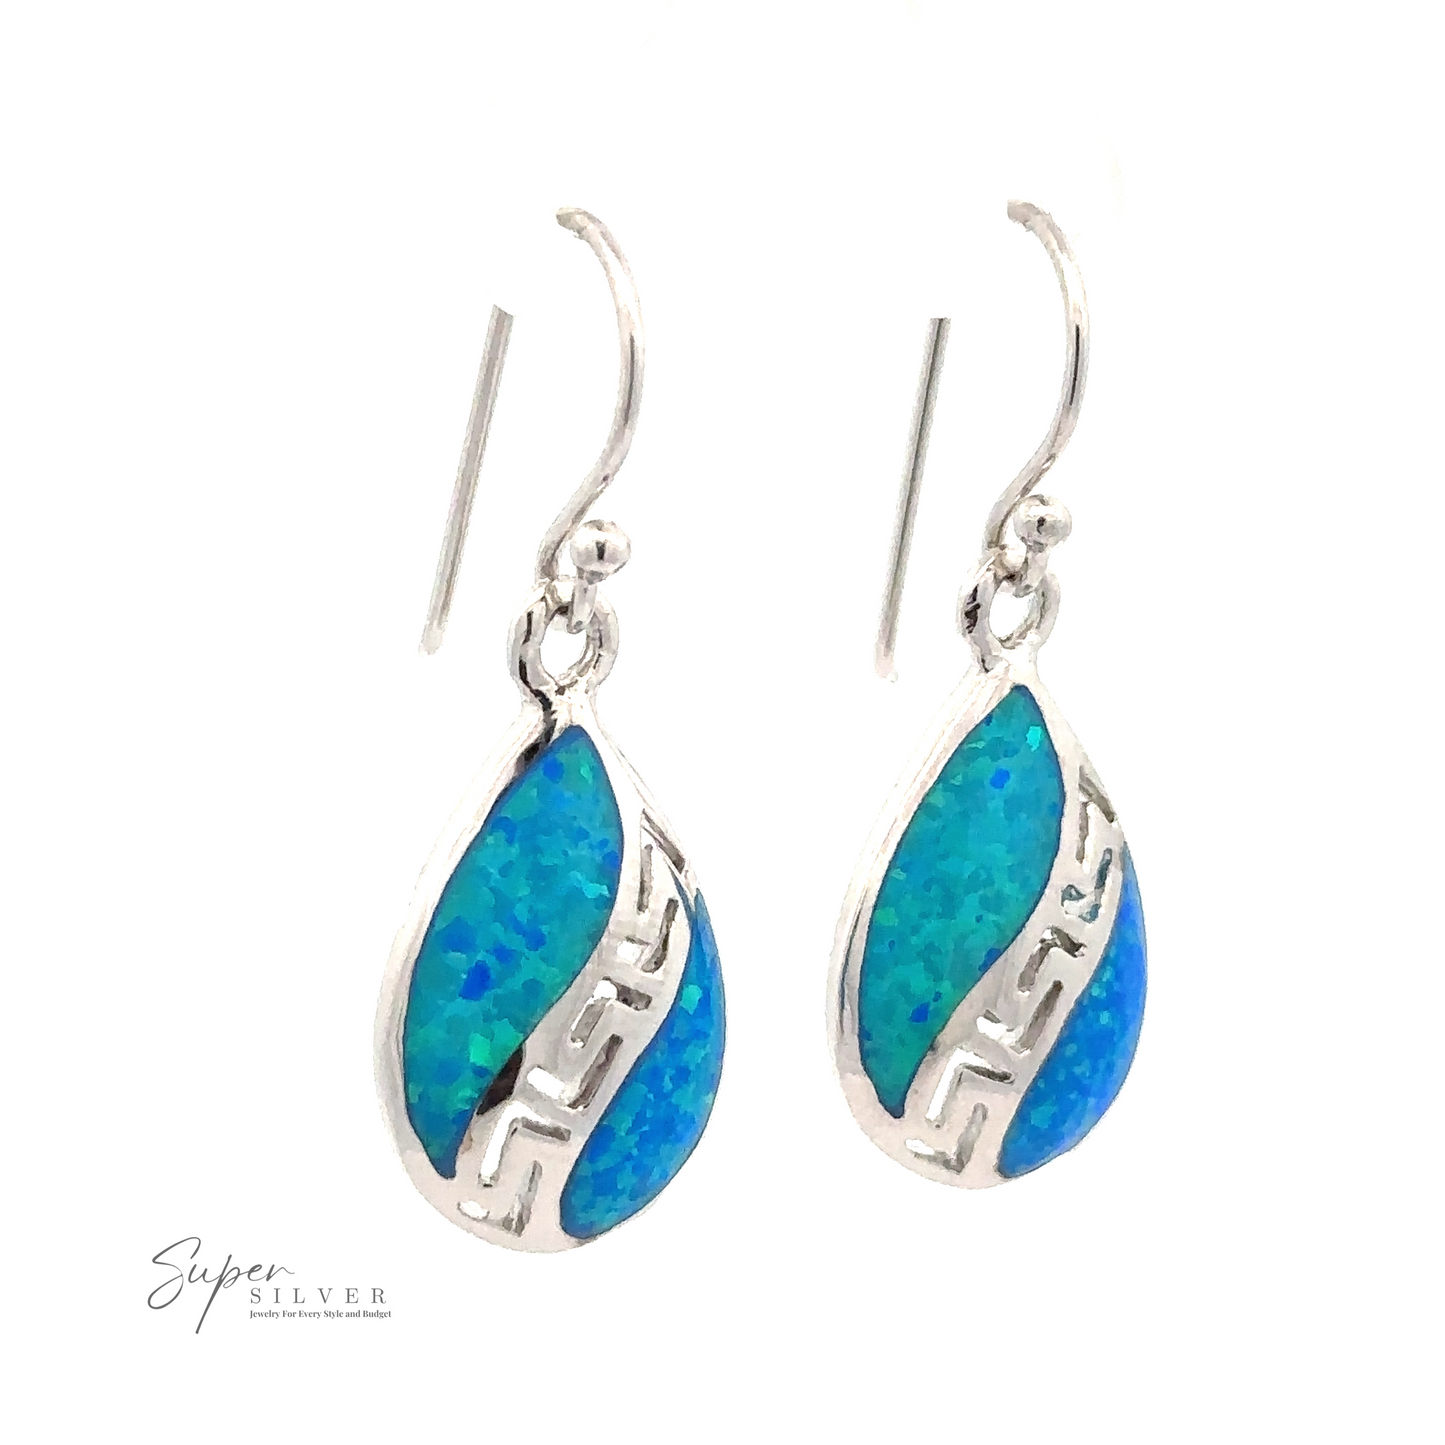 A pair of Lab-Opal Teardrop Earrings With Swirl Designs, displayed on a white background.